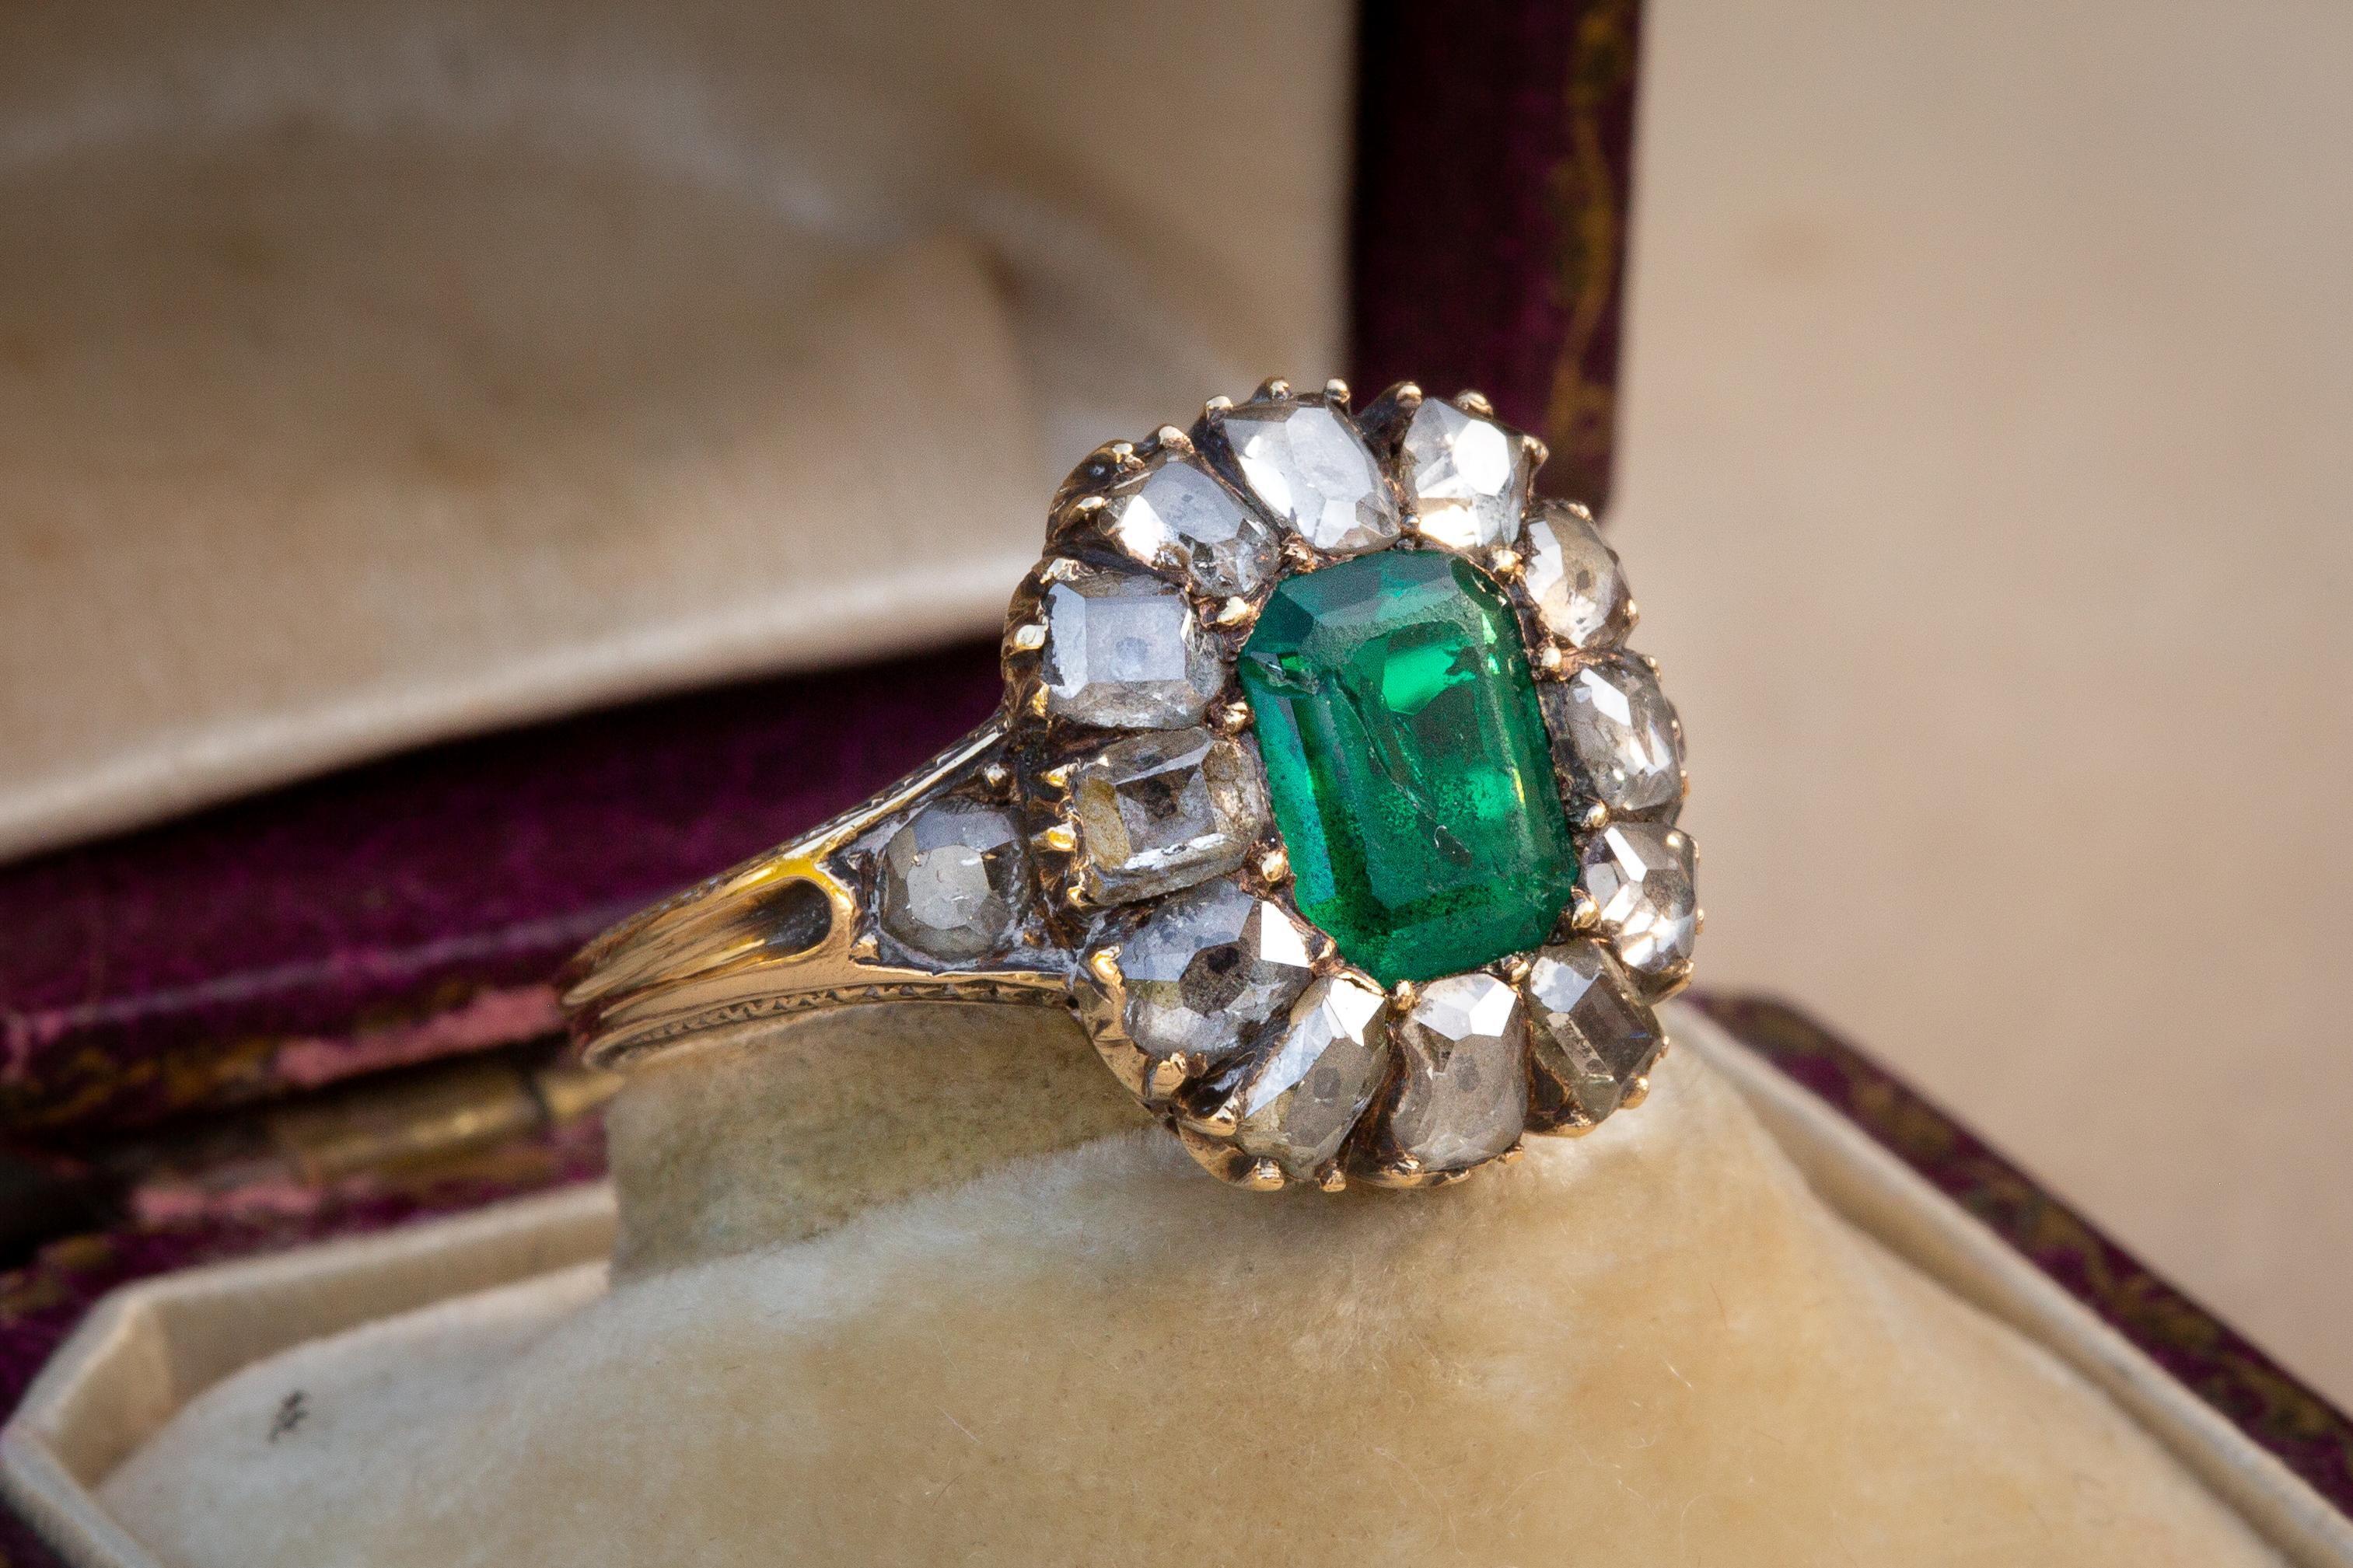 This spectacular antique French gold cluster ring dates to the second half of the 19th century. In the centre rests a step-cut natural emerald with a fantastic hue and saturation. It weighs approximately 1.2Ct and is likely to be of Columbian